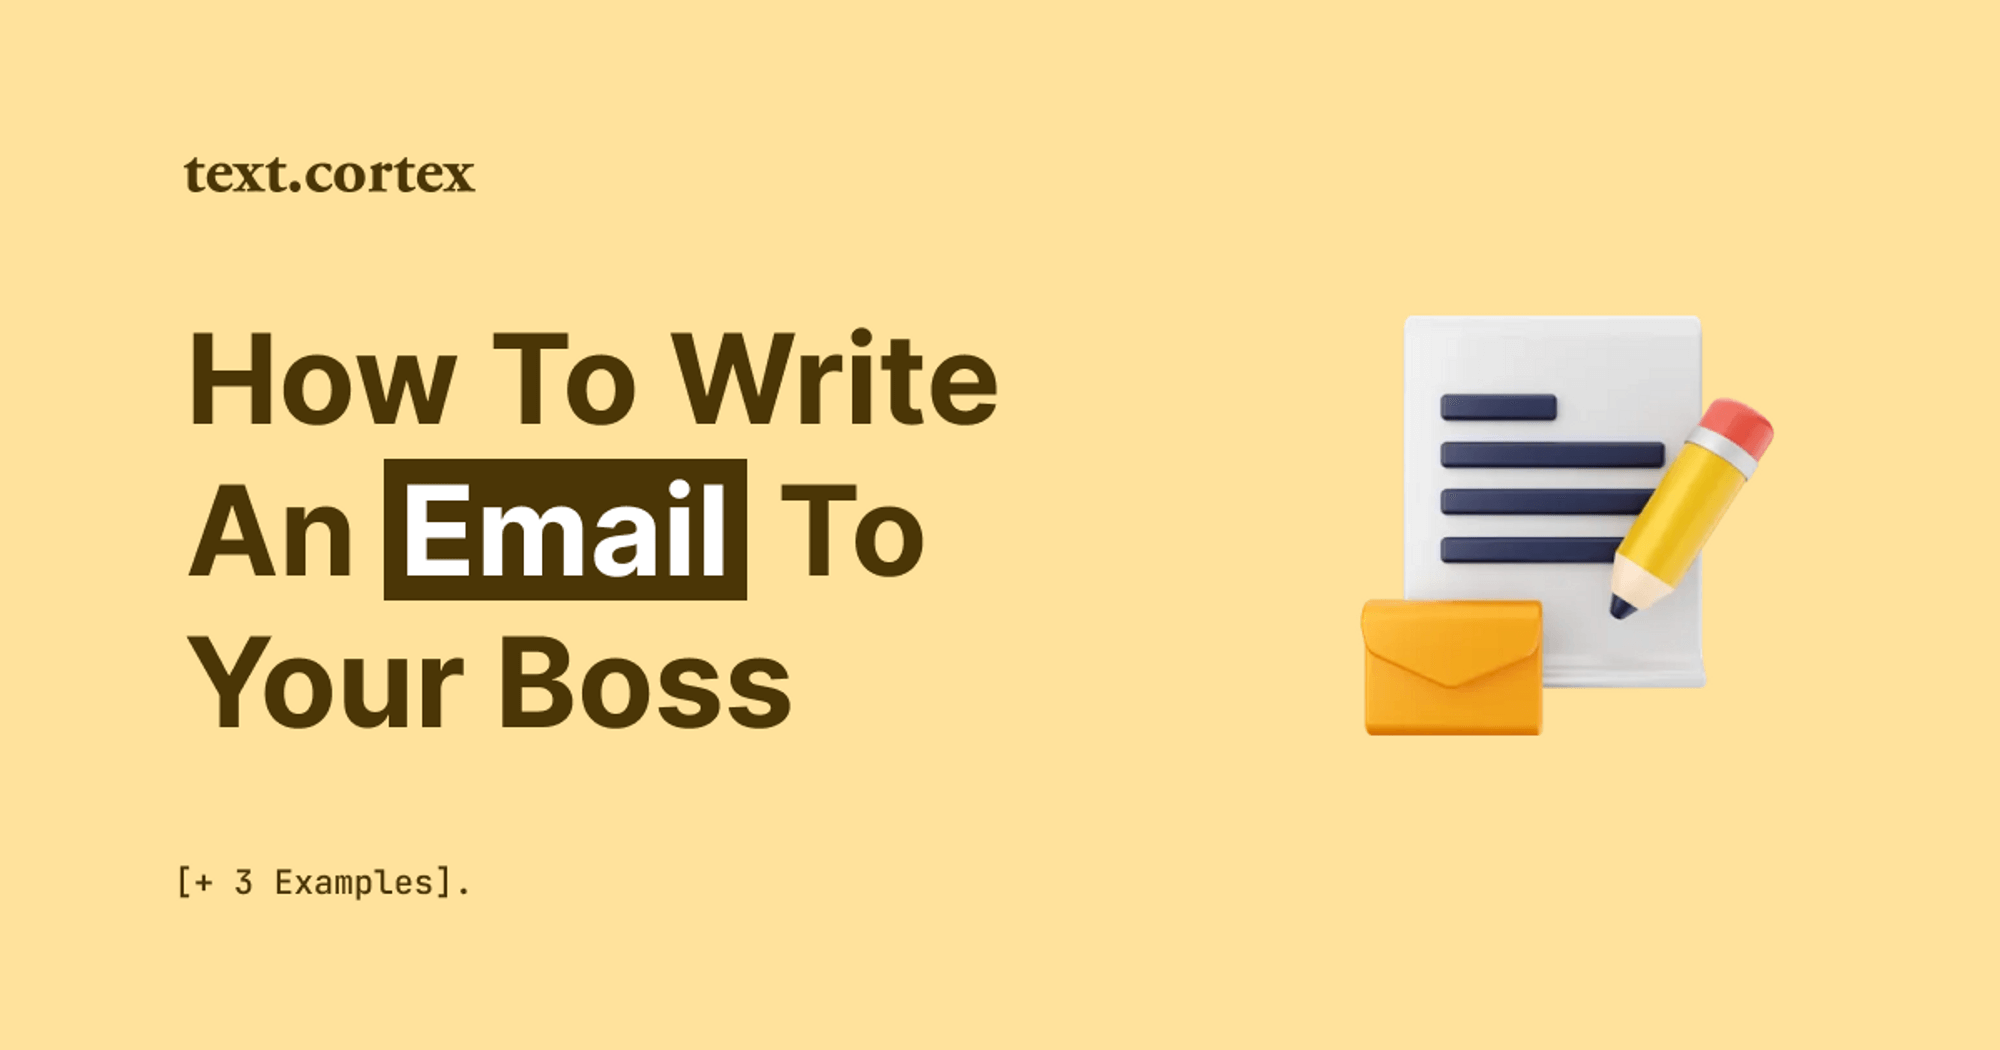 How To Write an Email to Your Boss & Manager [+3 Examples]